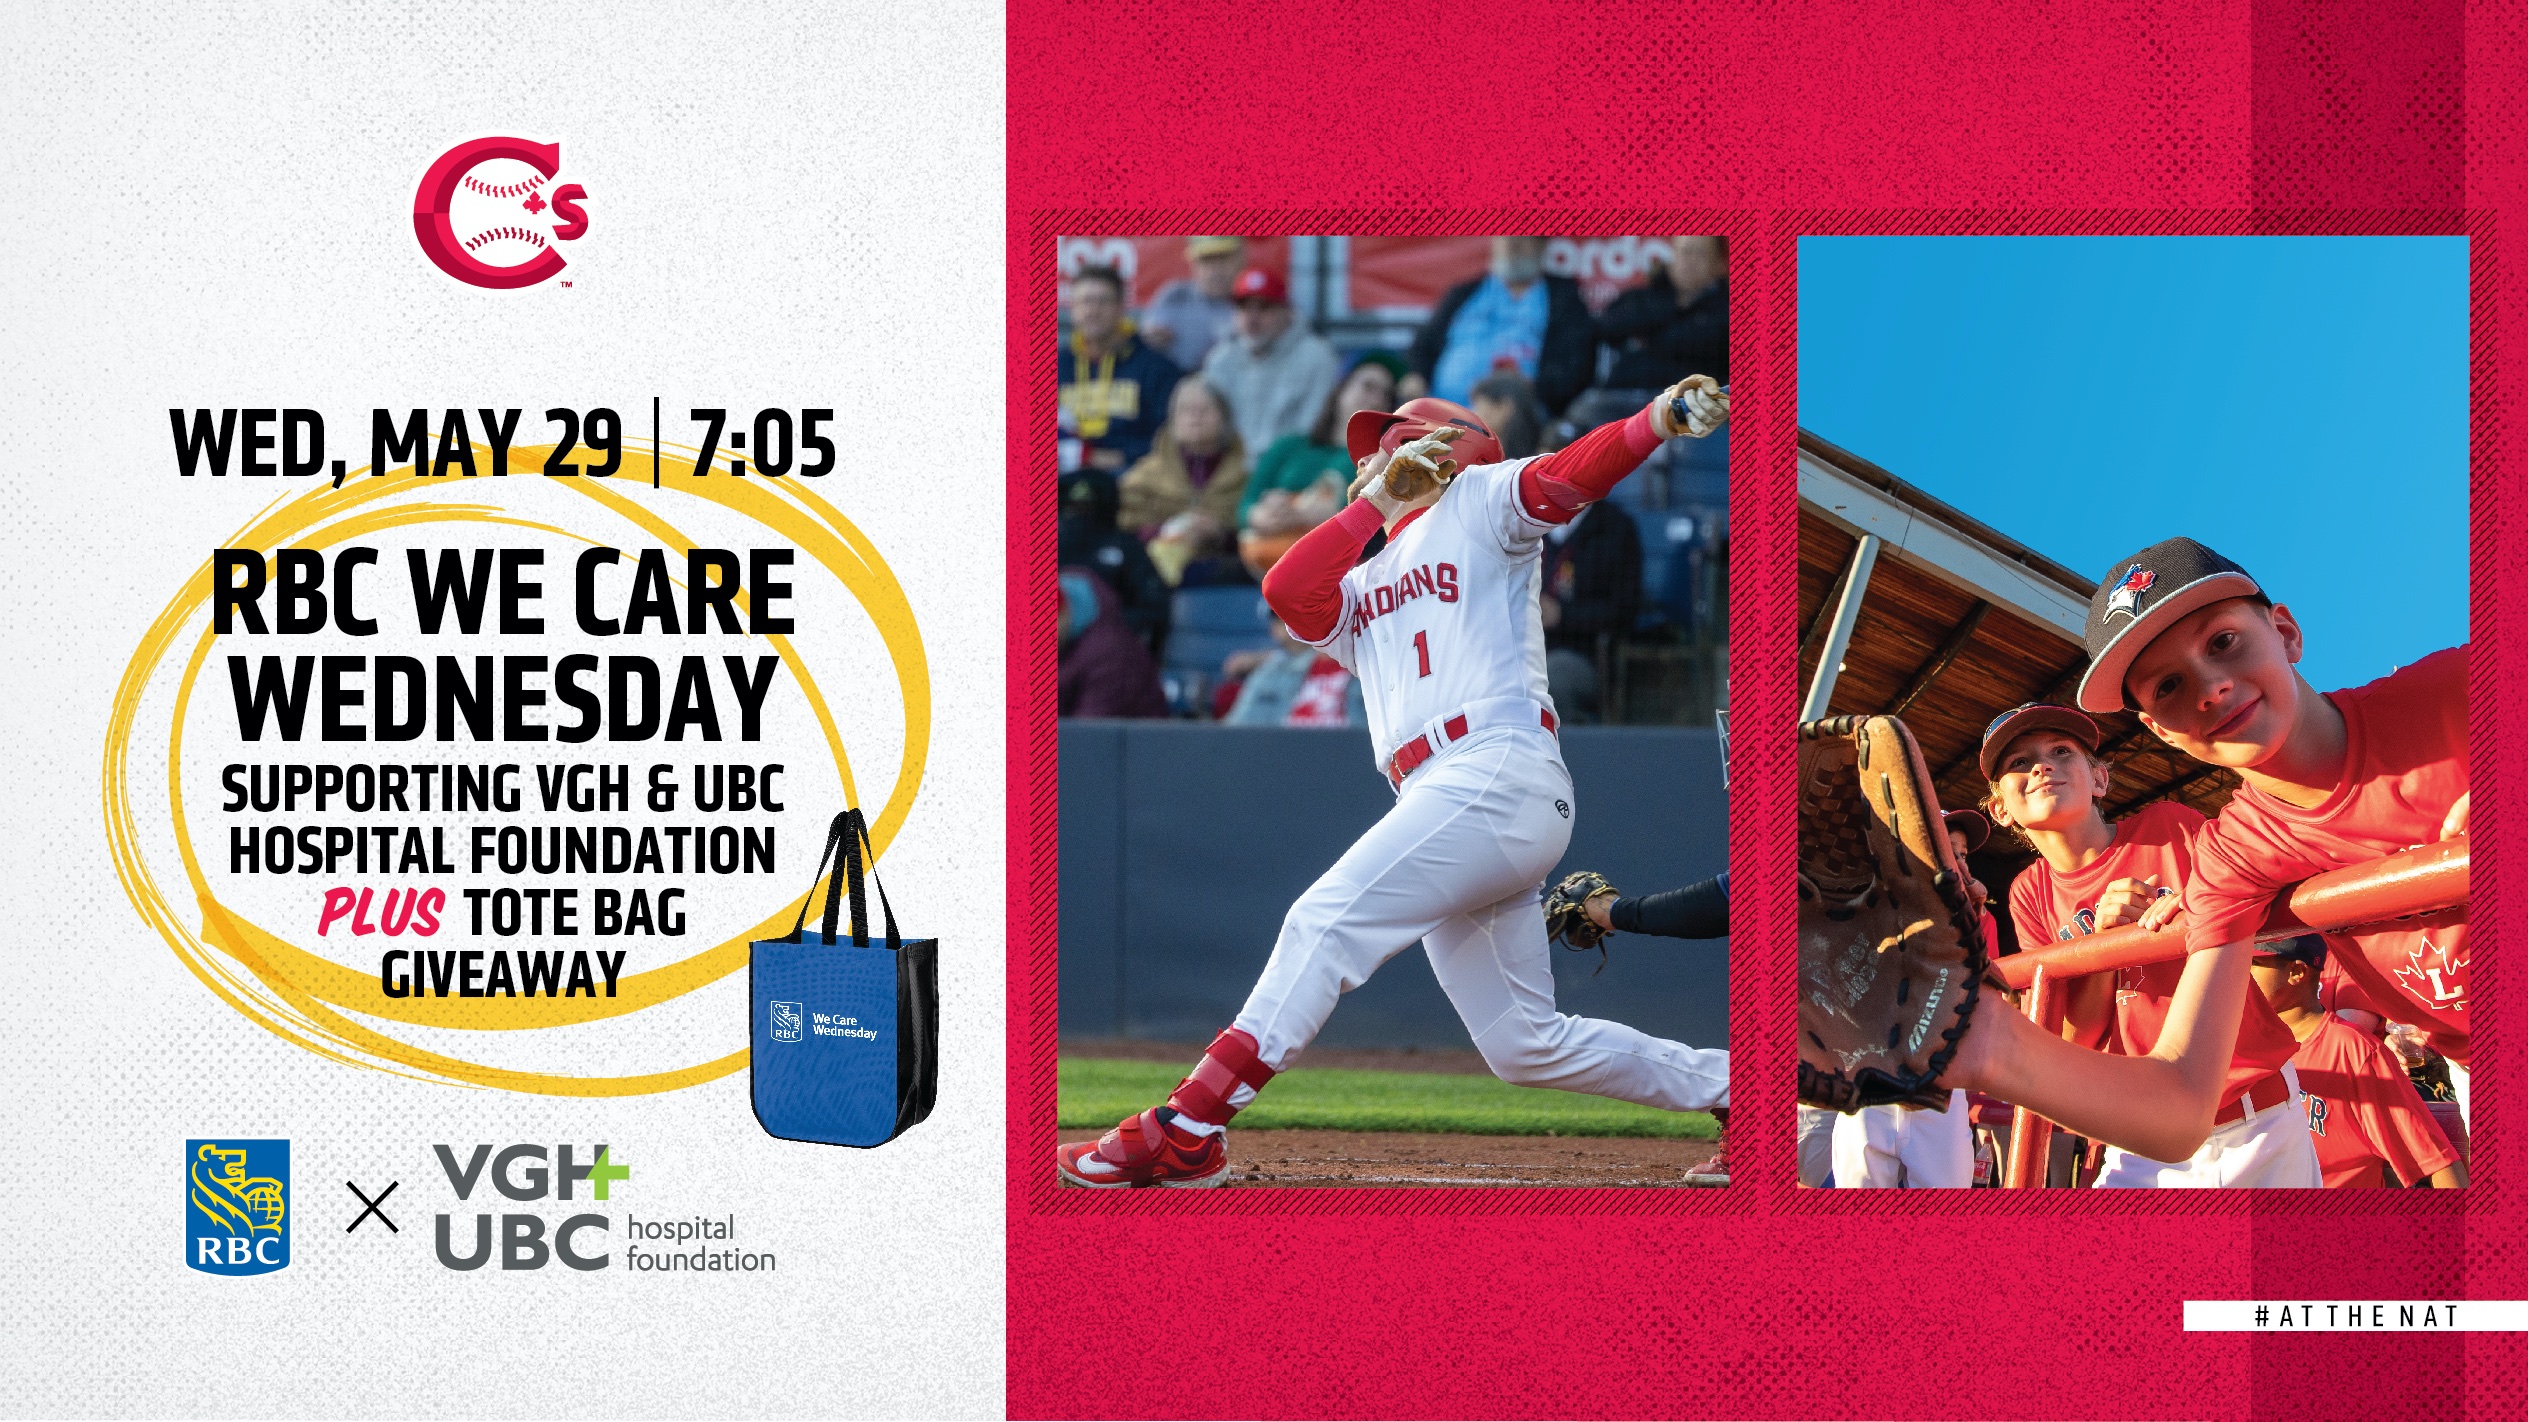 oin VGH & UBC Hospital Foundation and the Vancouver Canadians at Nat Bailey Stadium on Wednesday, May 29 as part of the RBC We Care Wednesday intiative! 